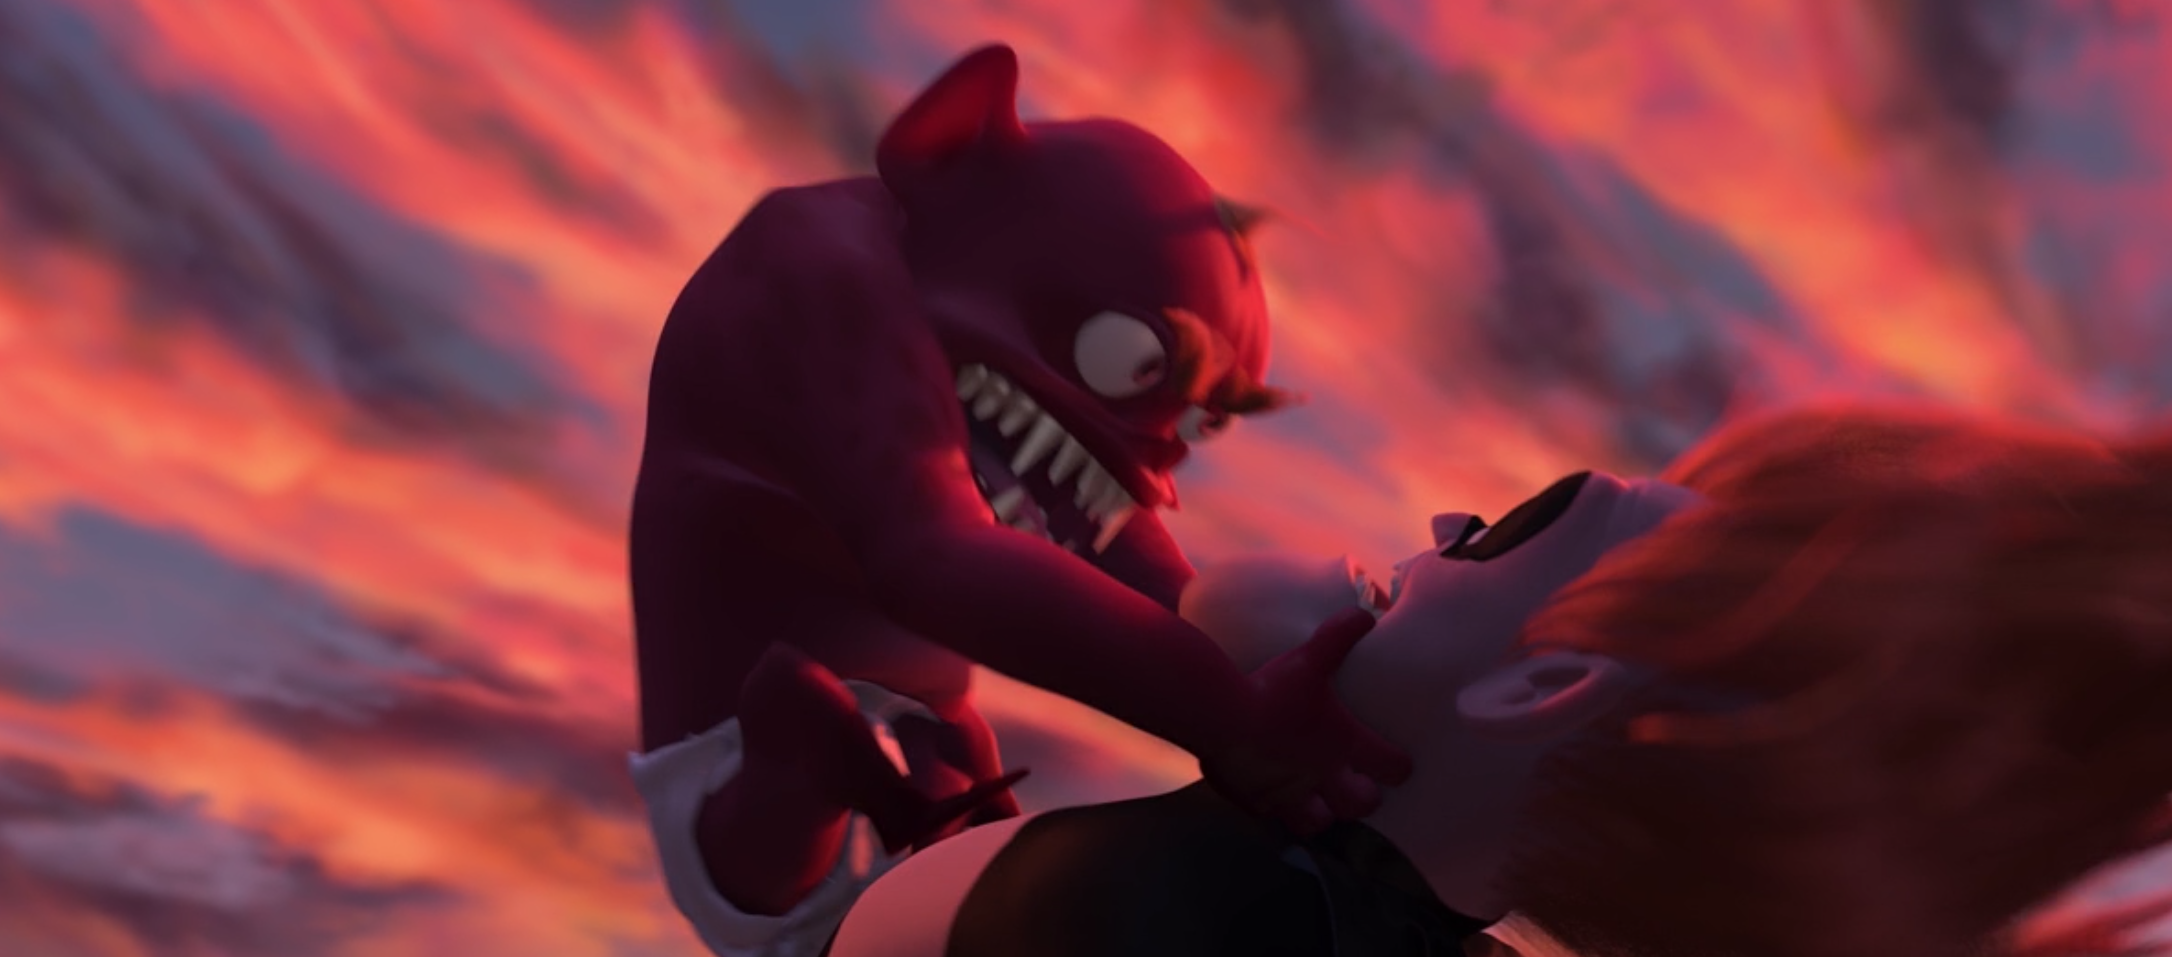 Jack Jack, in the form of a red skinned mini monster, grabs the face of Syndrome as they fly through the air.